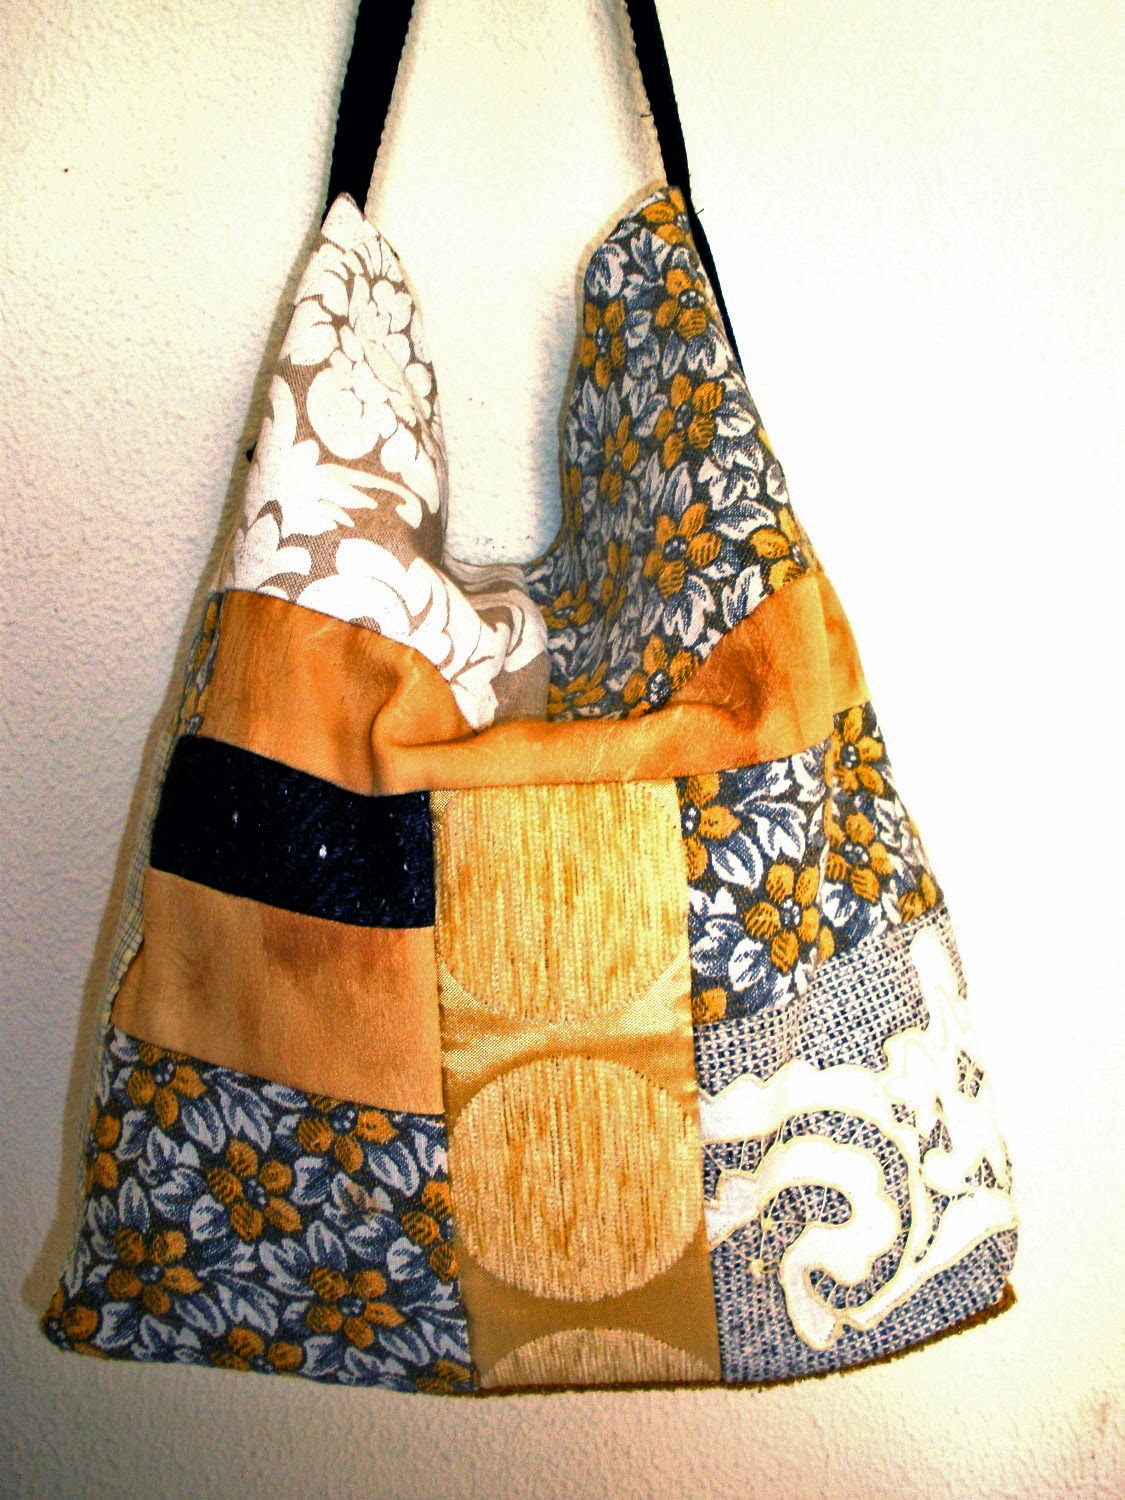 Ada's country life: Winter bag from recycled grey/yellow materials